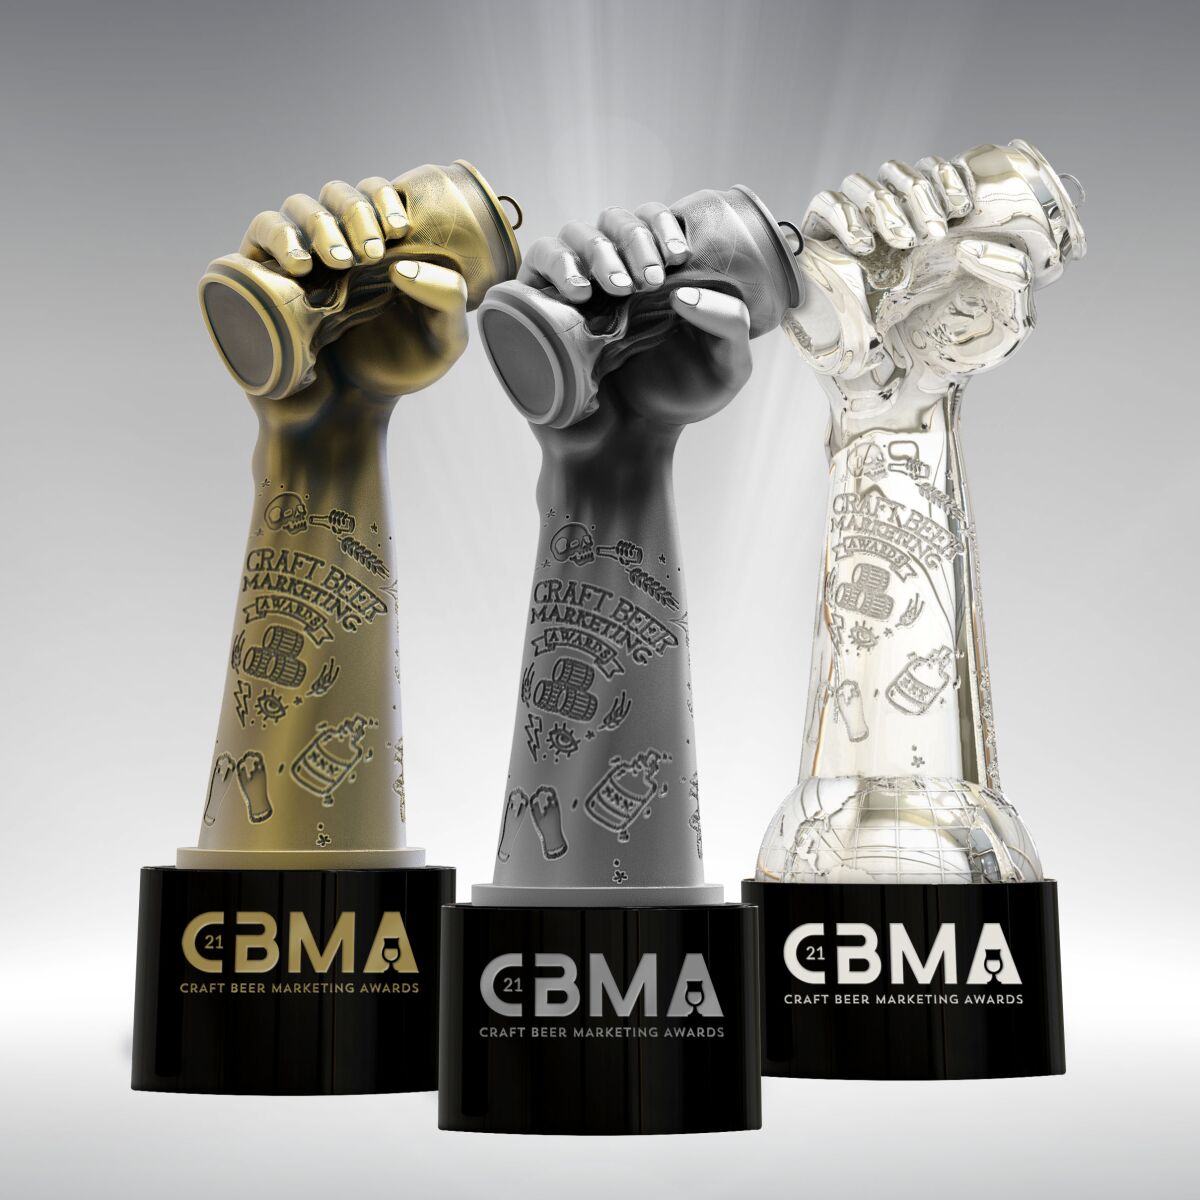 The Crushies are the trophies given to winners of the Craft Beer Marketing Awards.